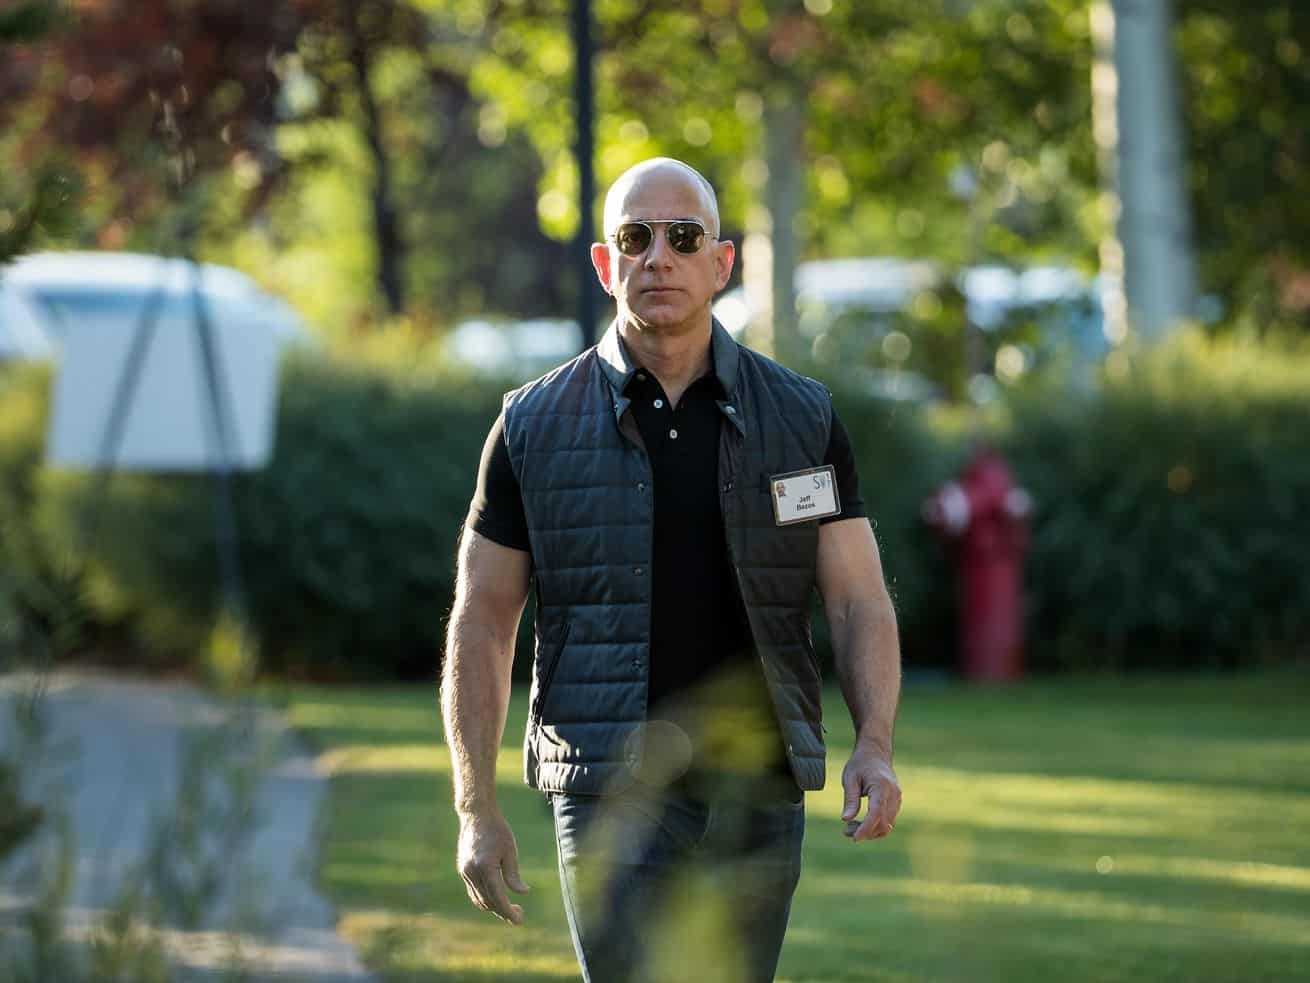 Jeff Bezos has been training for this